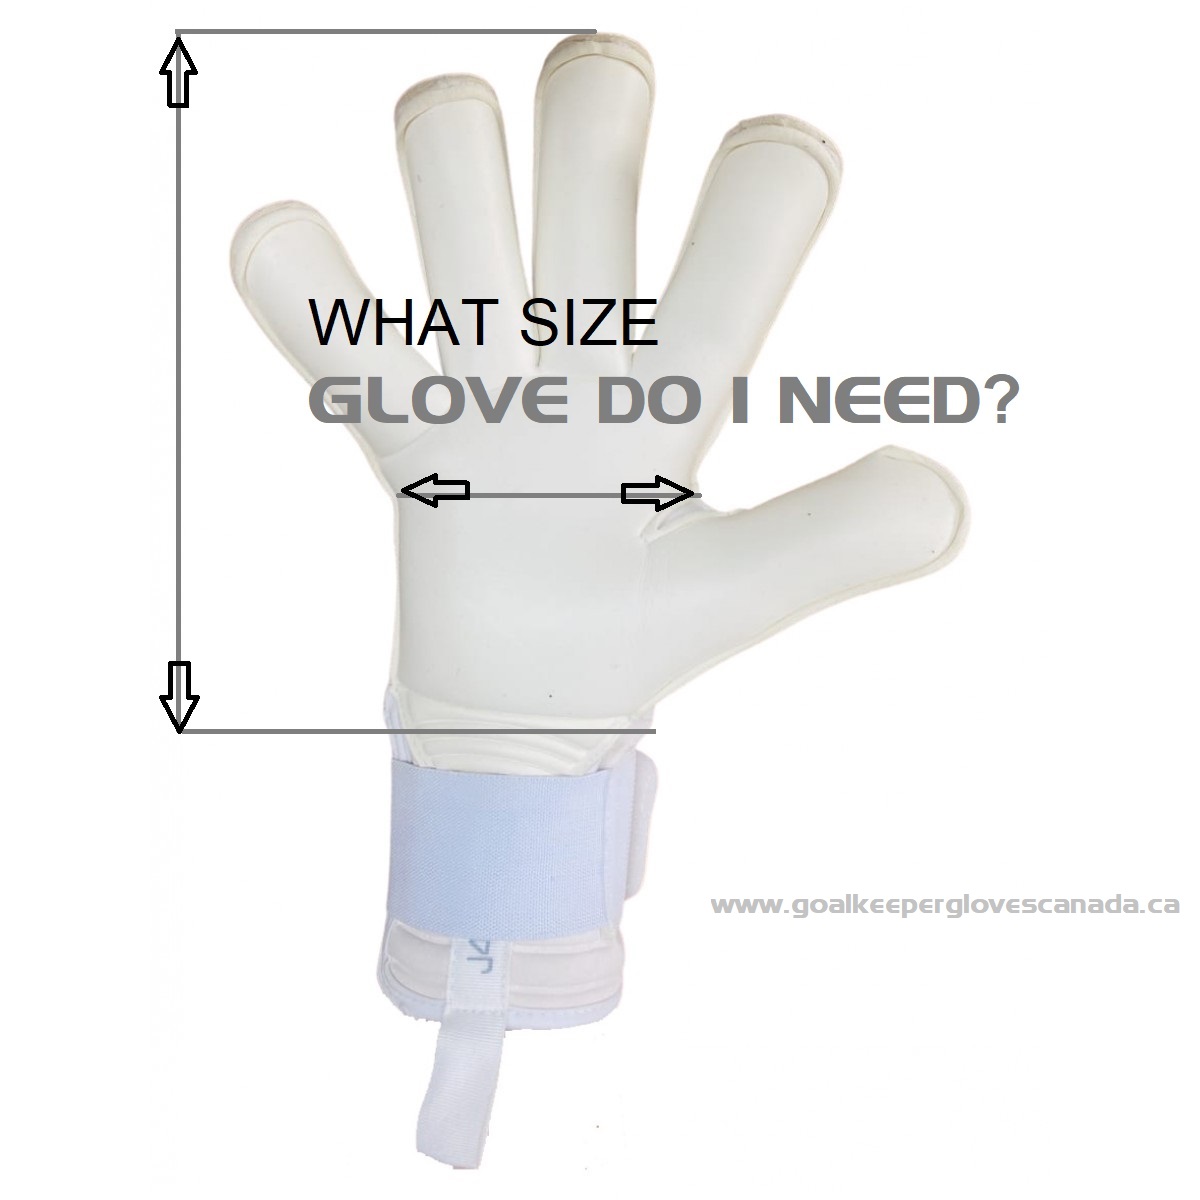 How Do I Pick The Correct Glove Size For My Hand?